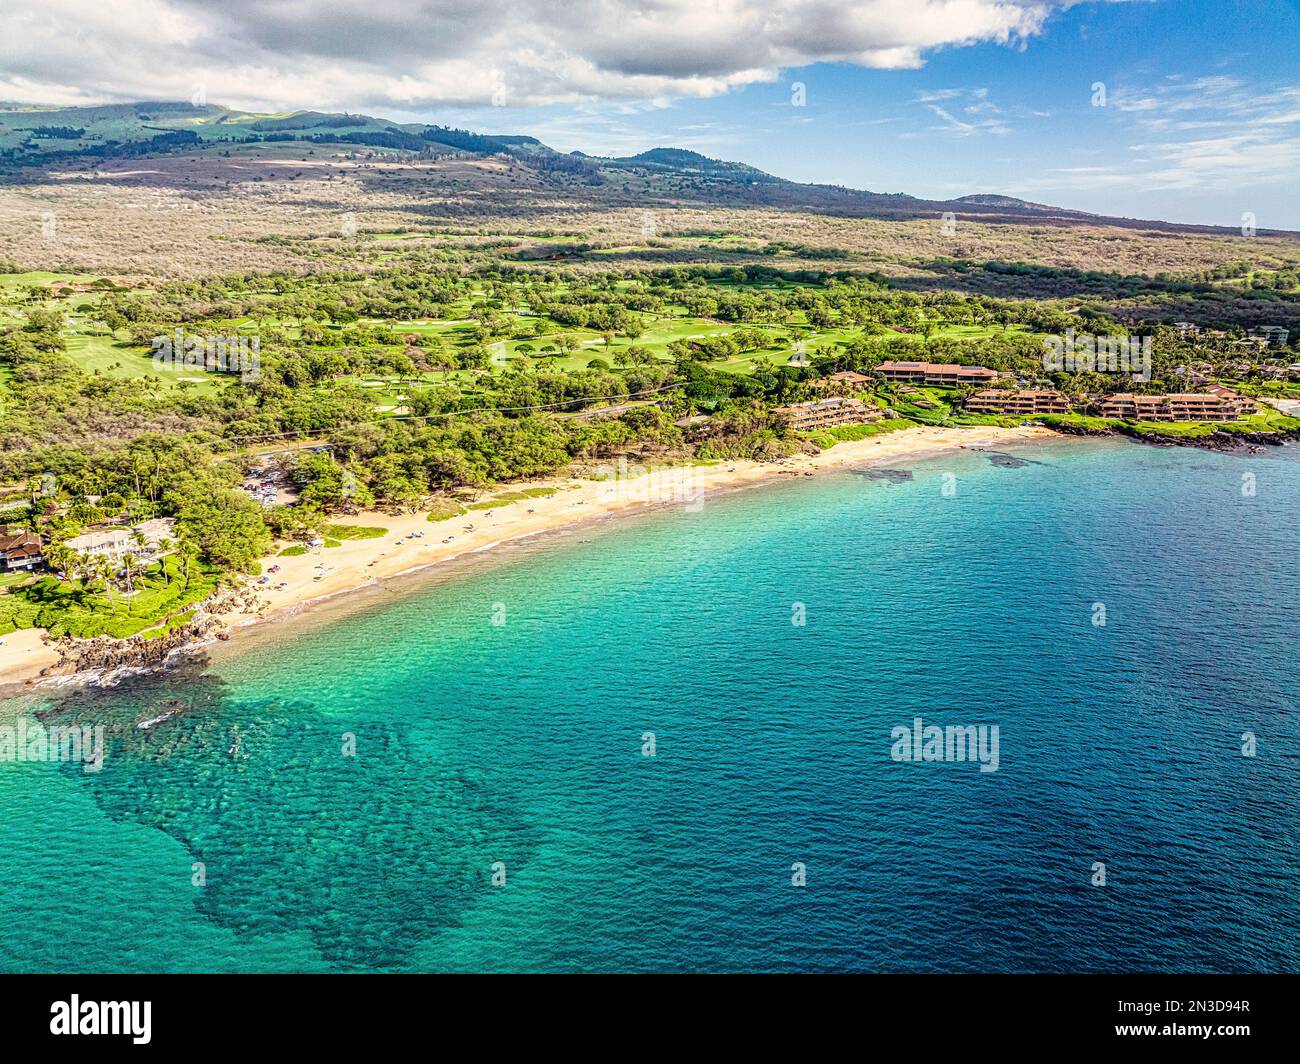 Aerial view of people enjoying the seaside at Po'olenalena Beach with resort accommodations and view of the turquoise water of the Pacific Ocean Stock Photo